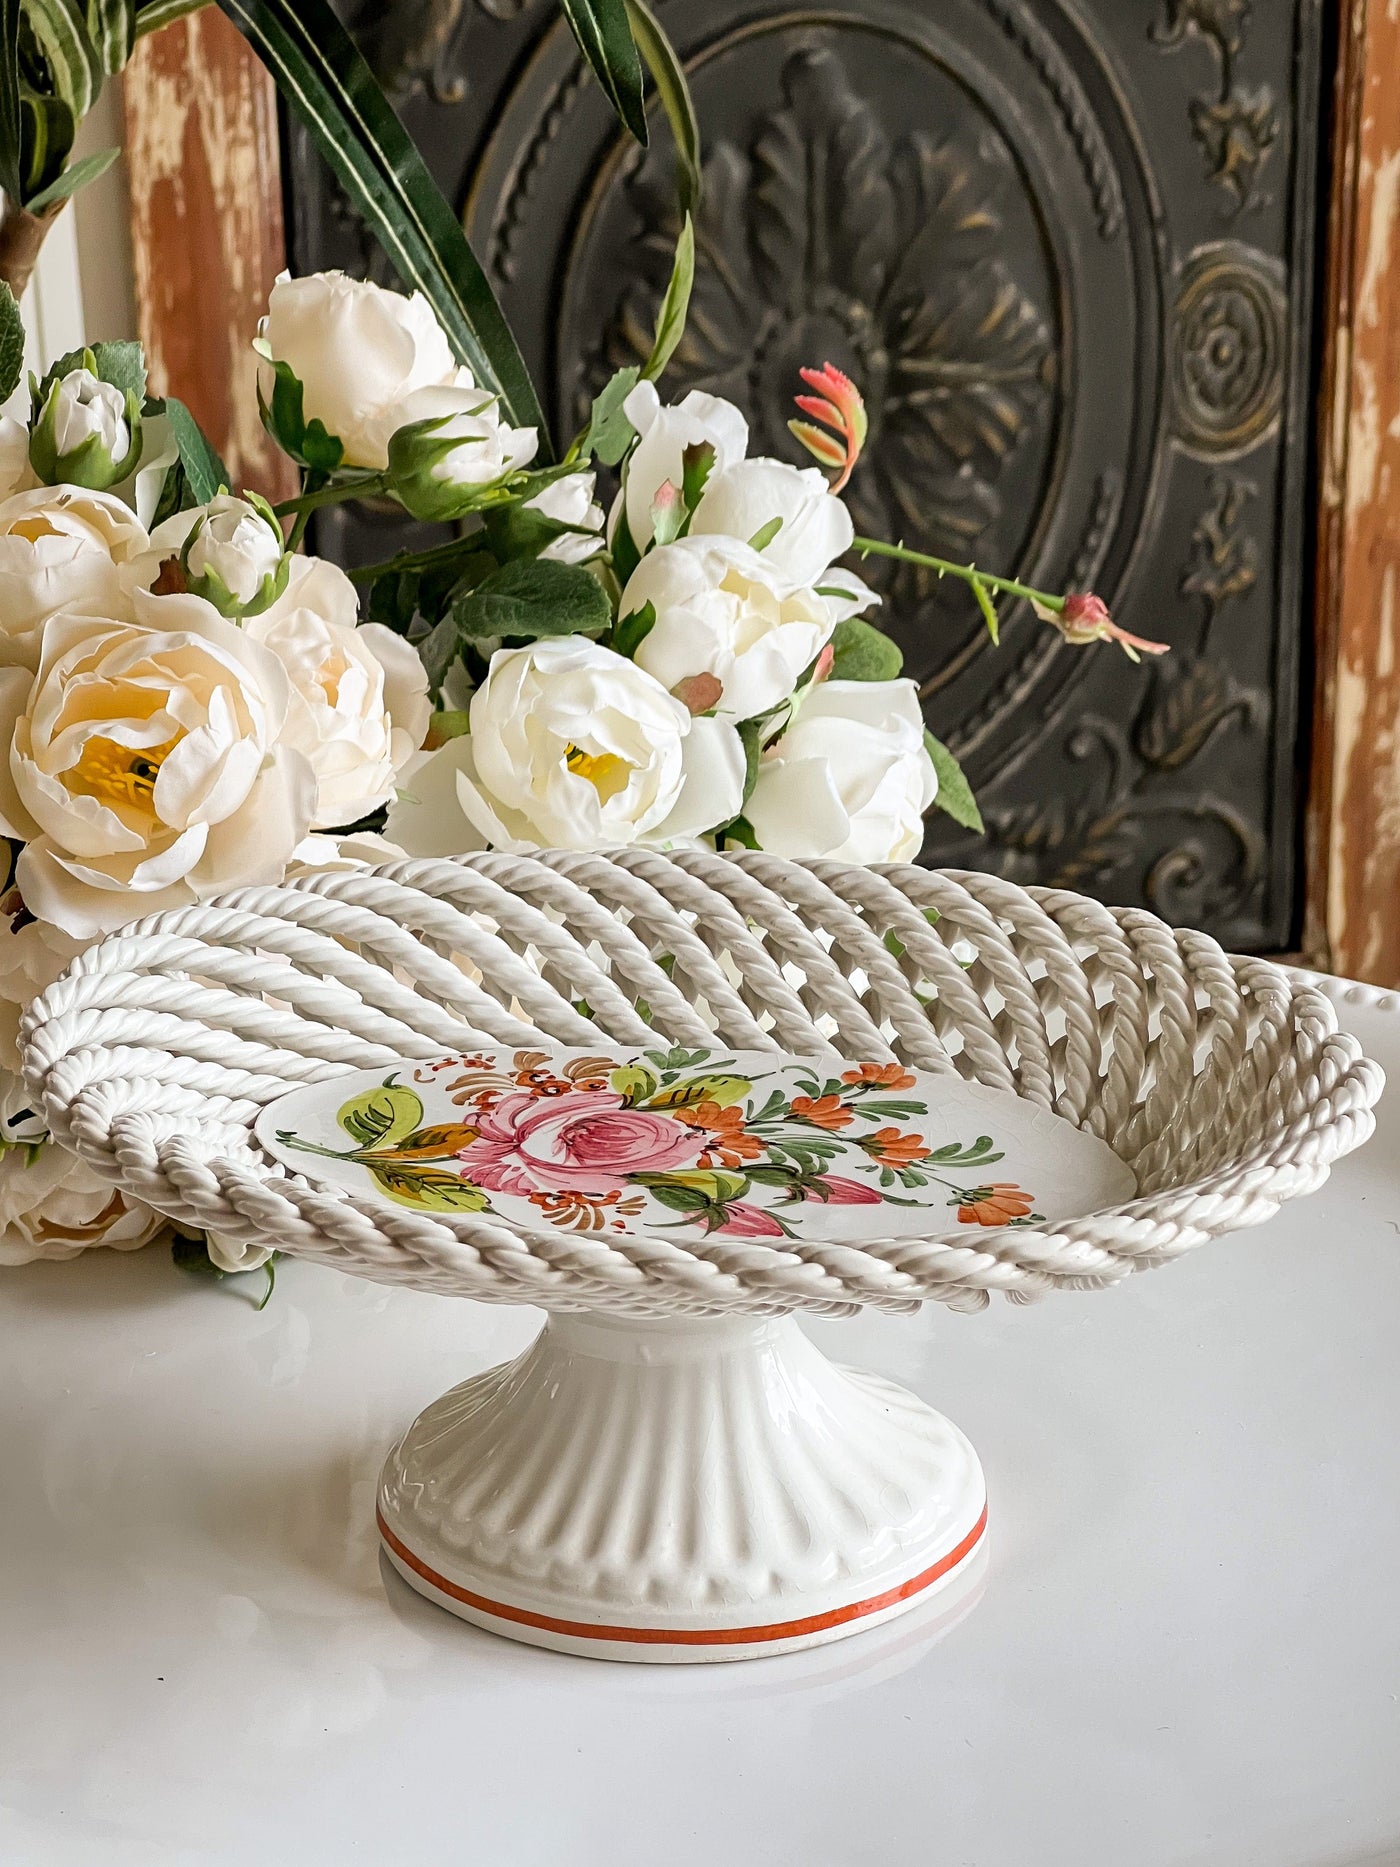 Italian Woven Lattice Ceramic Pedestal Dish with Hand-Painted Florals by Bassano Revive In Style Vintage Furniture Painted Refinished Redesign Beautiful One of a Kind Artistic Antique Unique Home Decor Interior Design French Country Shabby Chic Cottage Farmhouse Grandmillenial Coastal Chalk Paint Metallic Glam Eclectic Quality Dovetailed Rustic Furniture Painter Pinterest Bedroom Living Room Entryway Kitchen Home Trends House Styles Decorating ideas